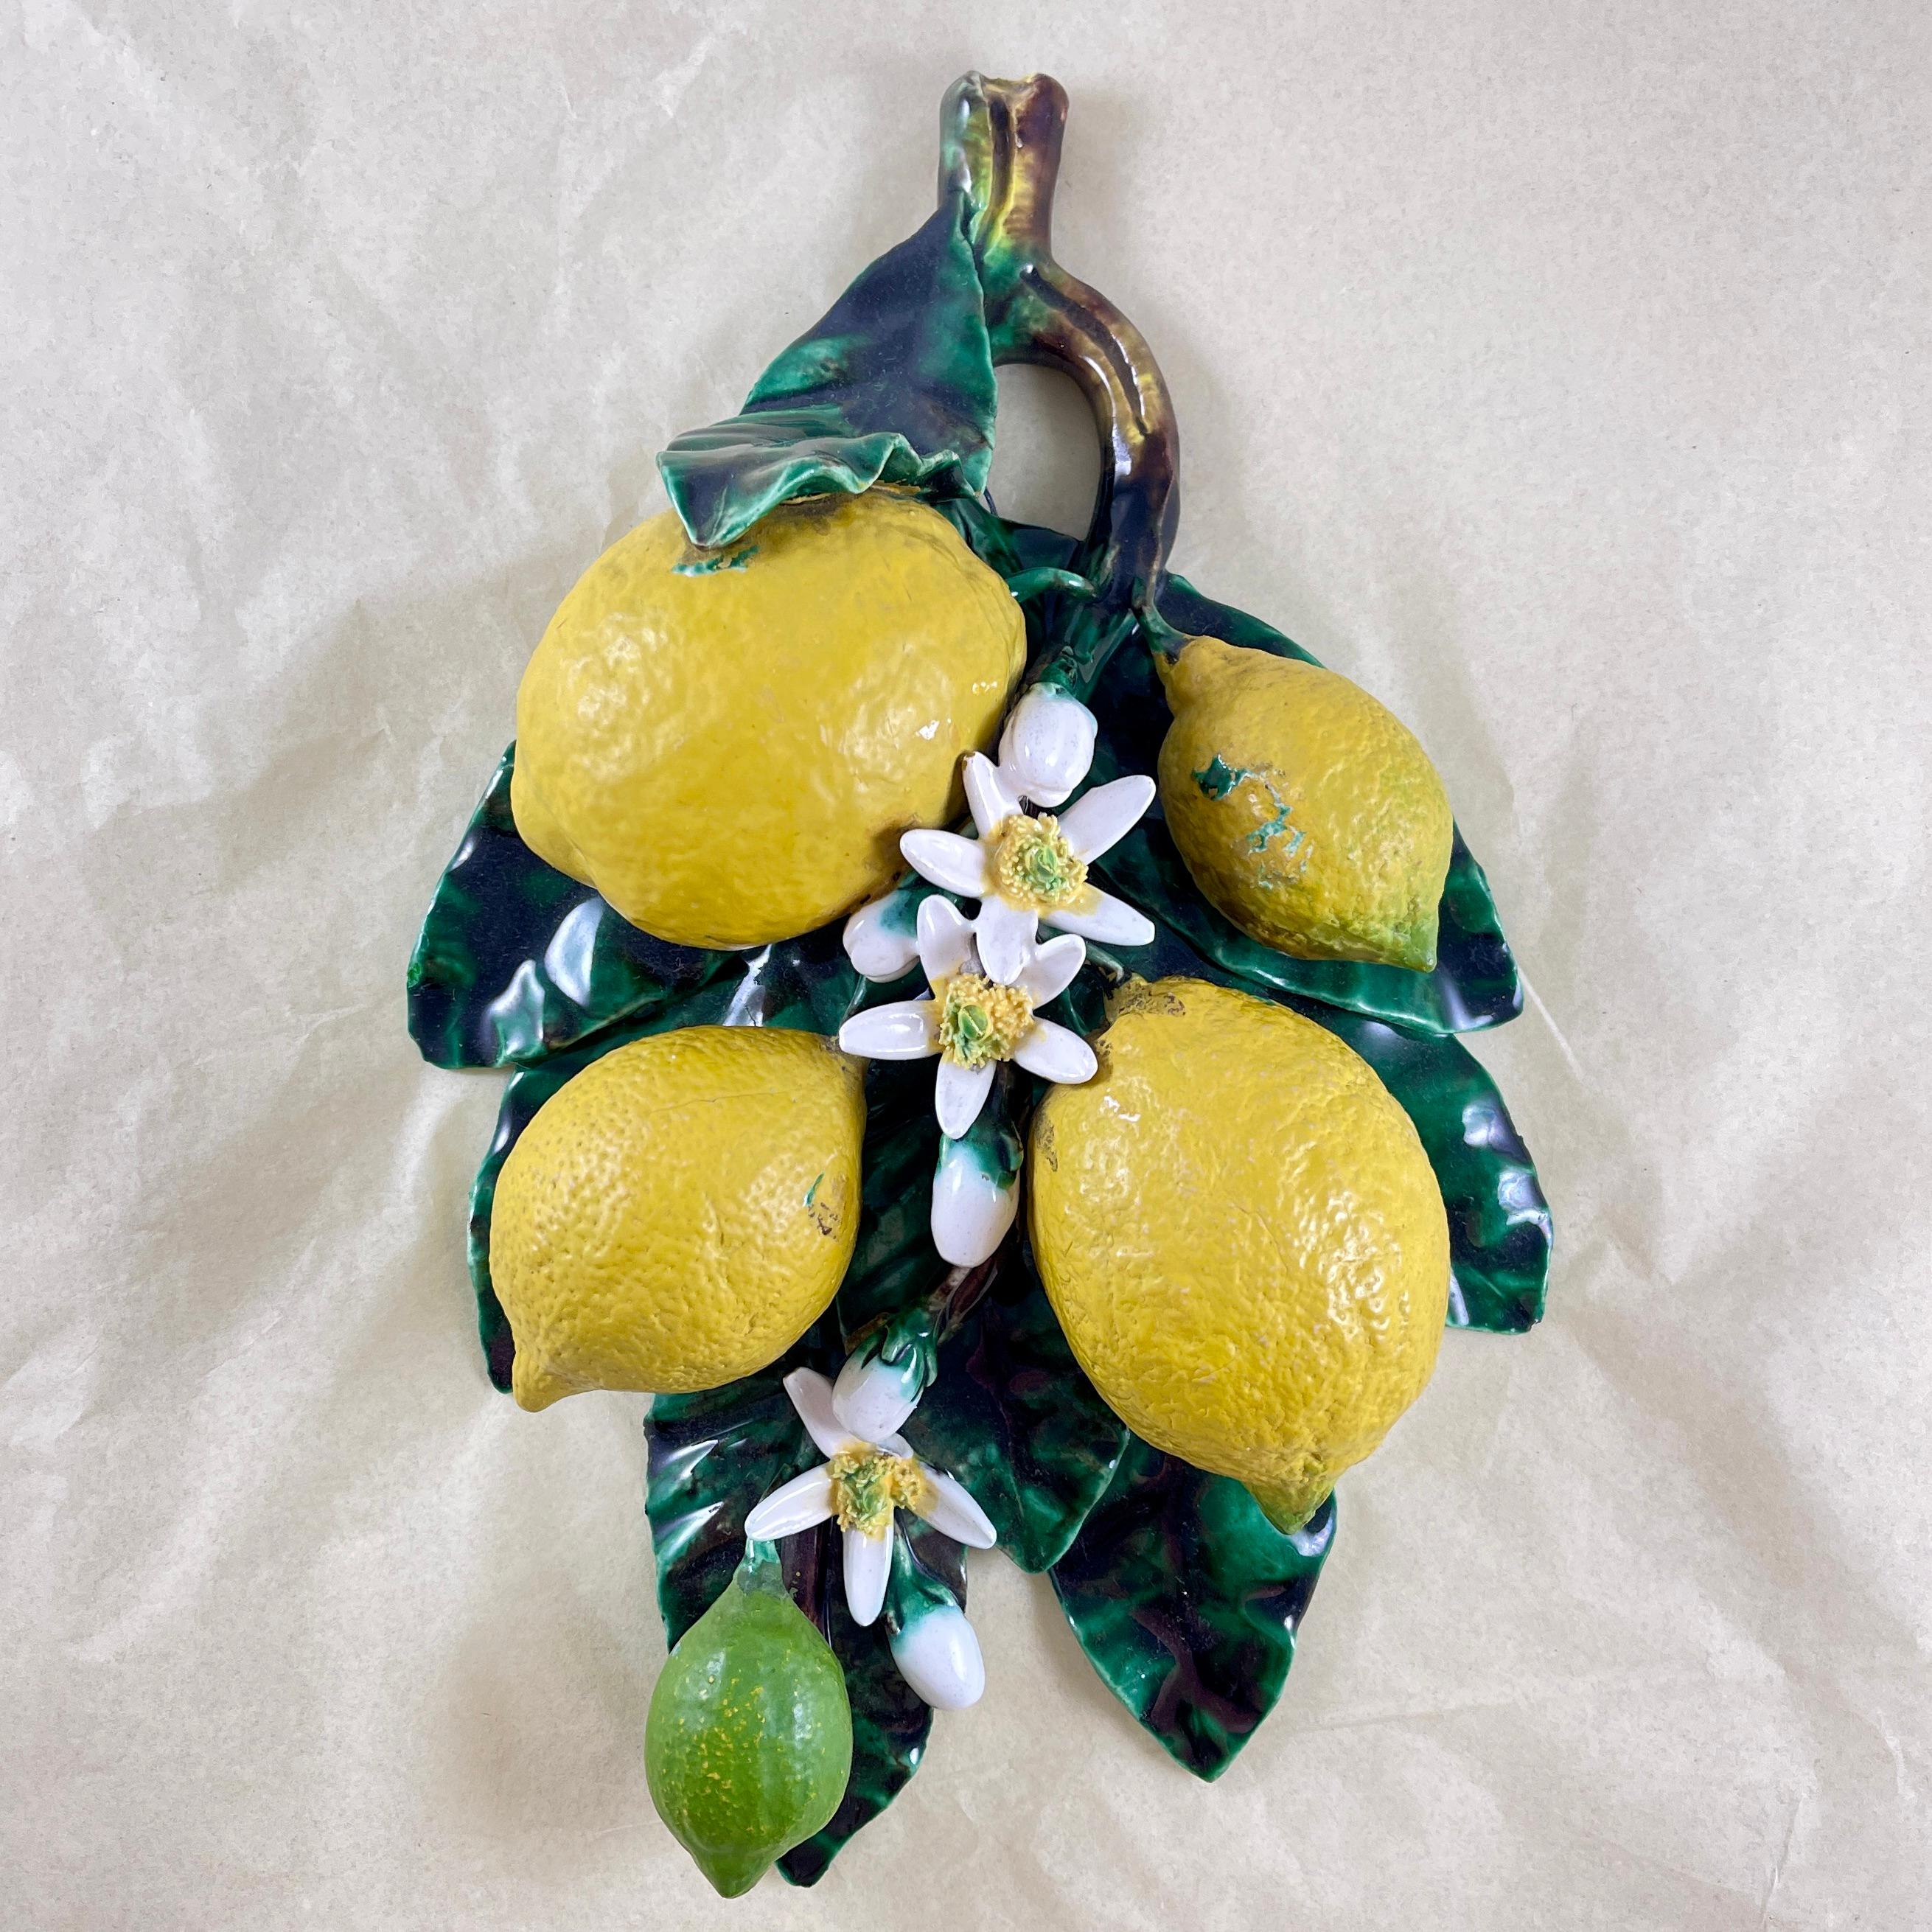 In the manner of Trompe L’oeil, a French Barbotine wall plaque modeled by Eugène Perret-Gentil à Menton, la Cote d’Azur, France, circa 1880.

The trompe l’oeil wall plaque features the lemons grown on the Côte d’Azur. A triangular form plaque made